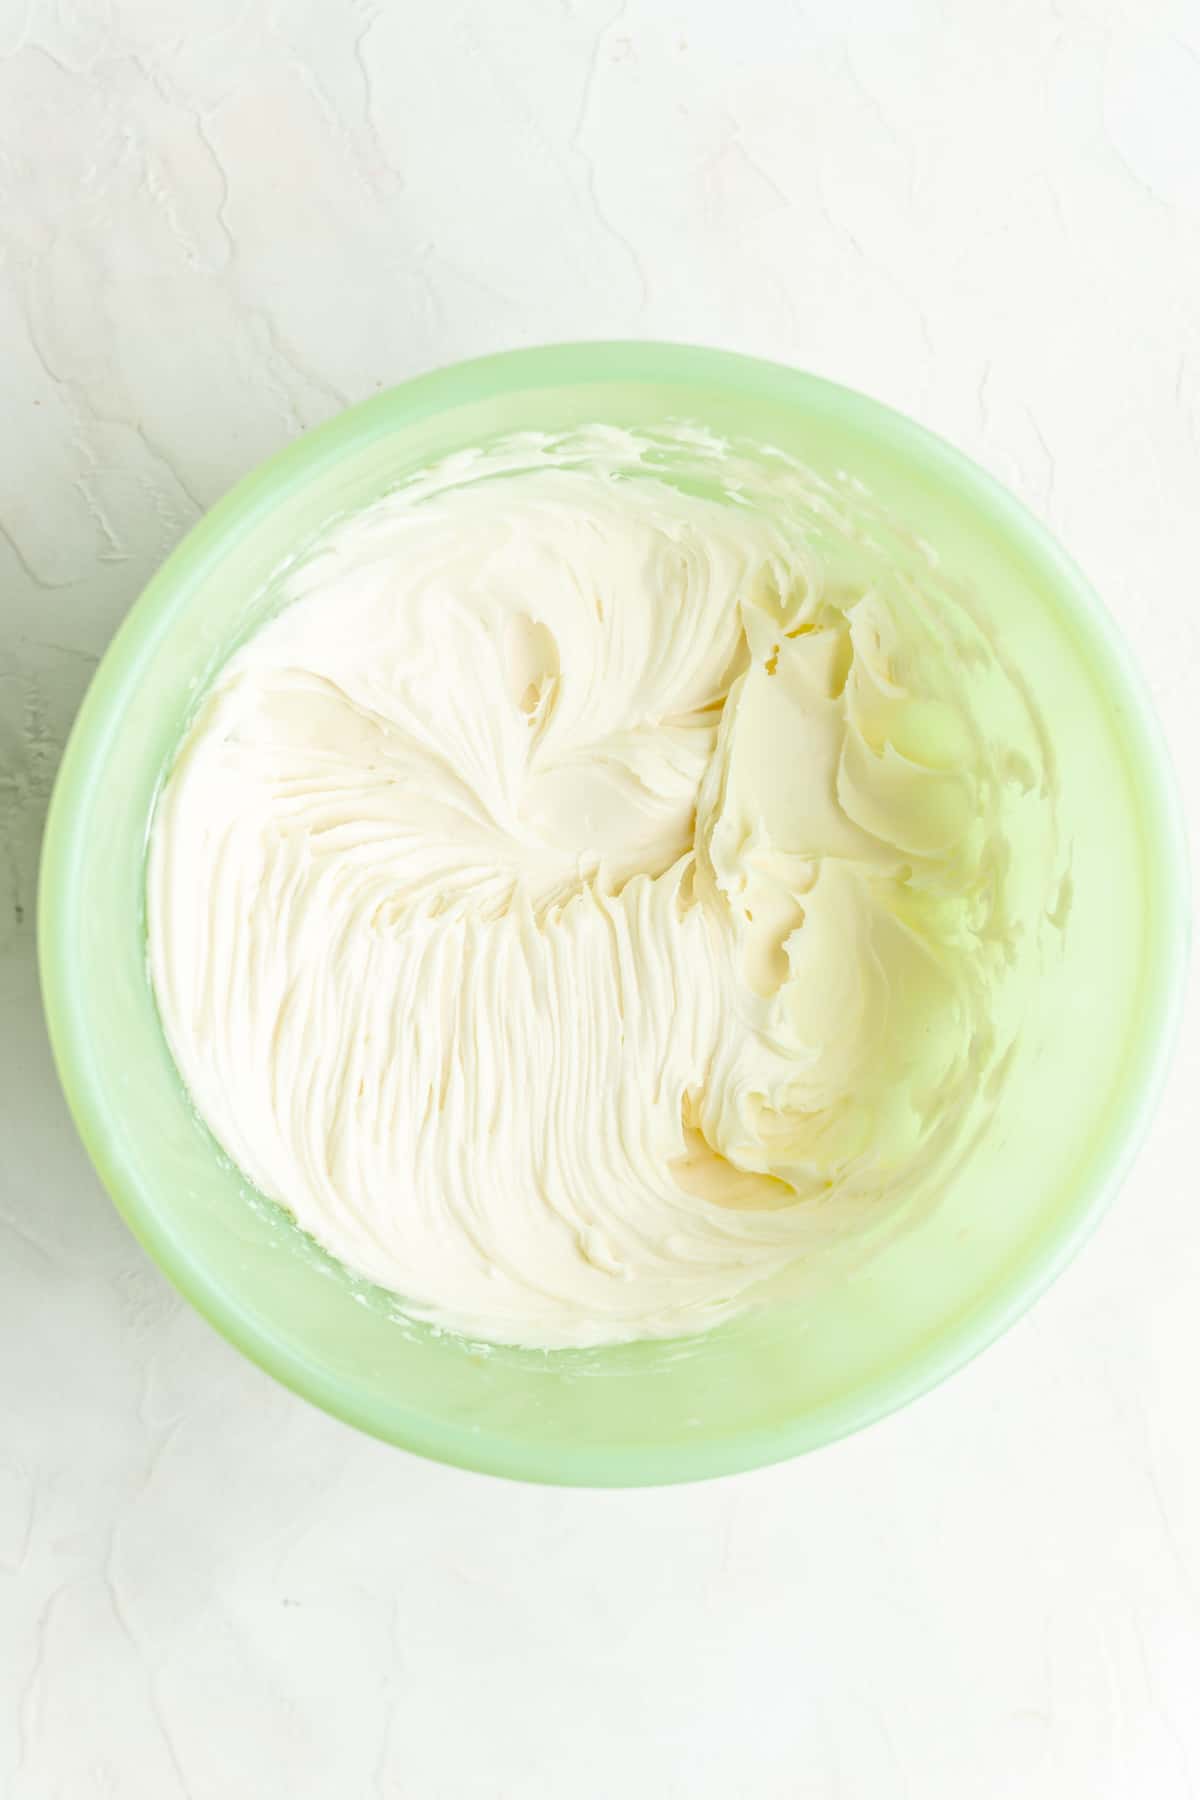 Fully mixed cream cheese icing in green mixing bowl on white background.